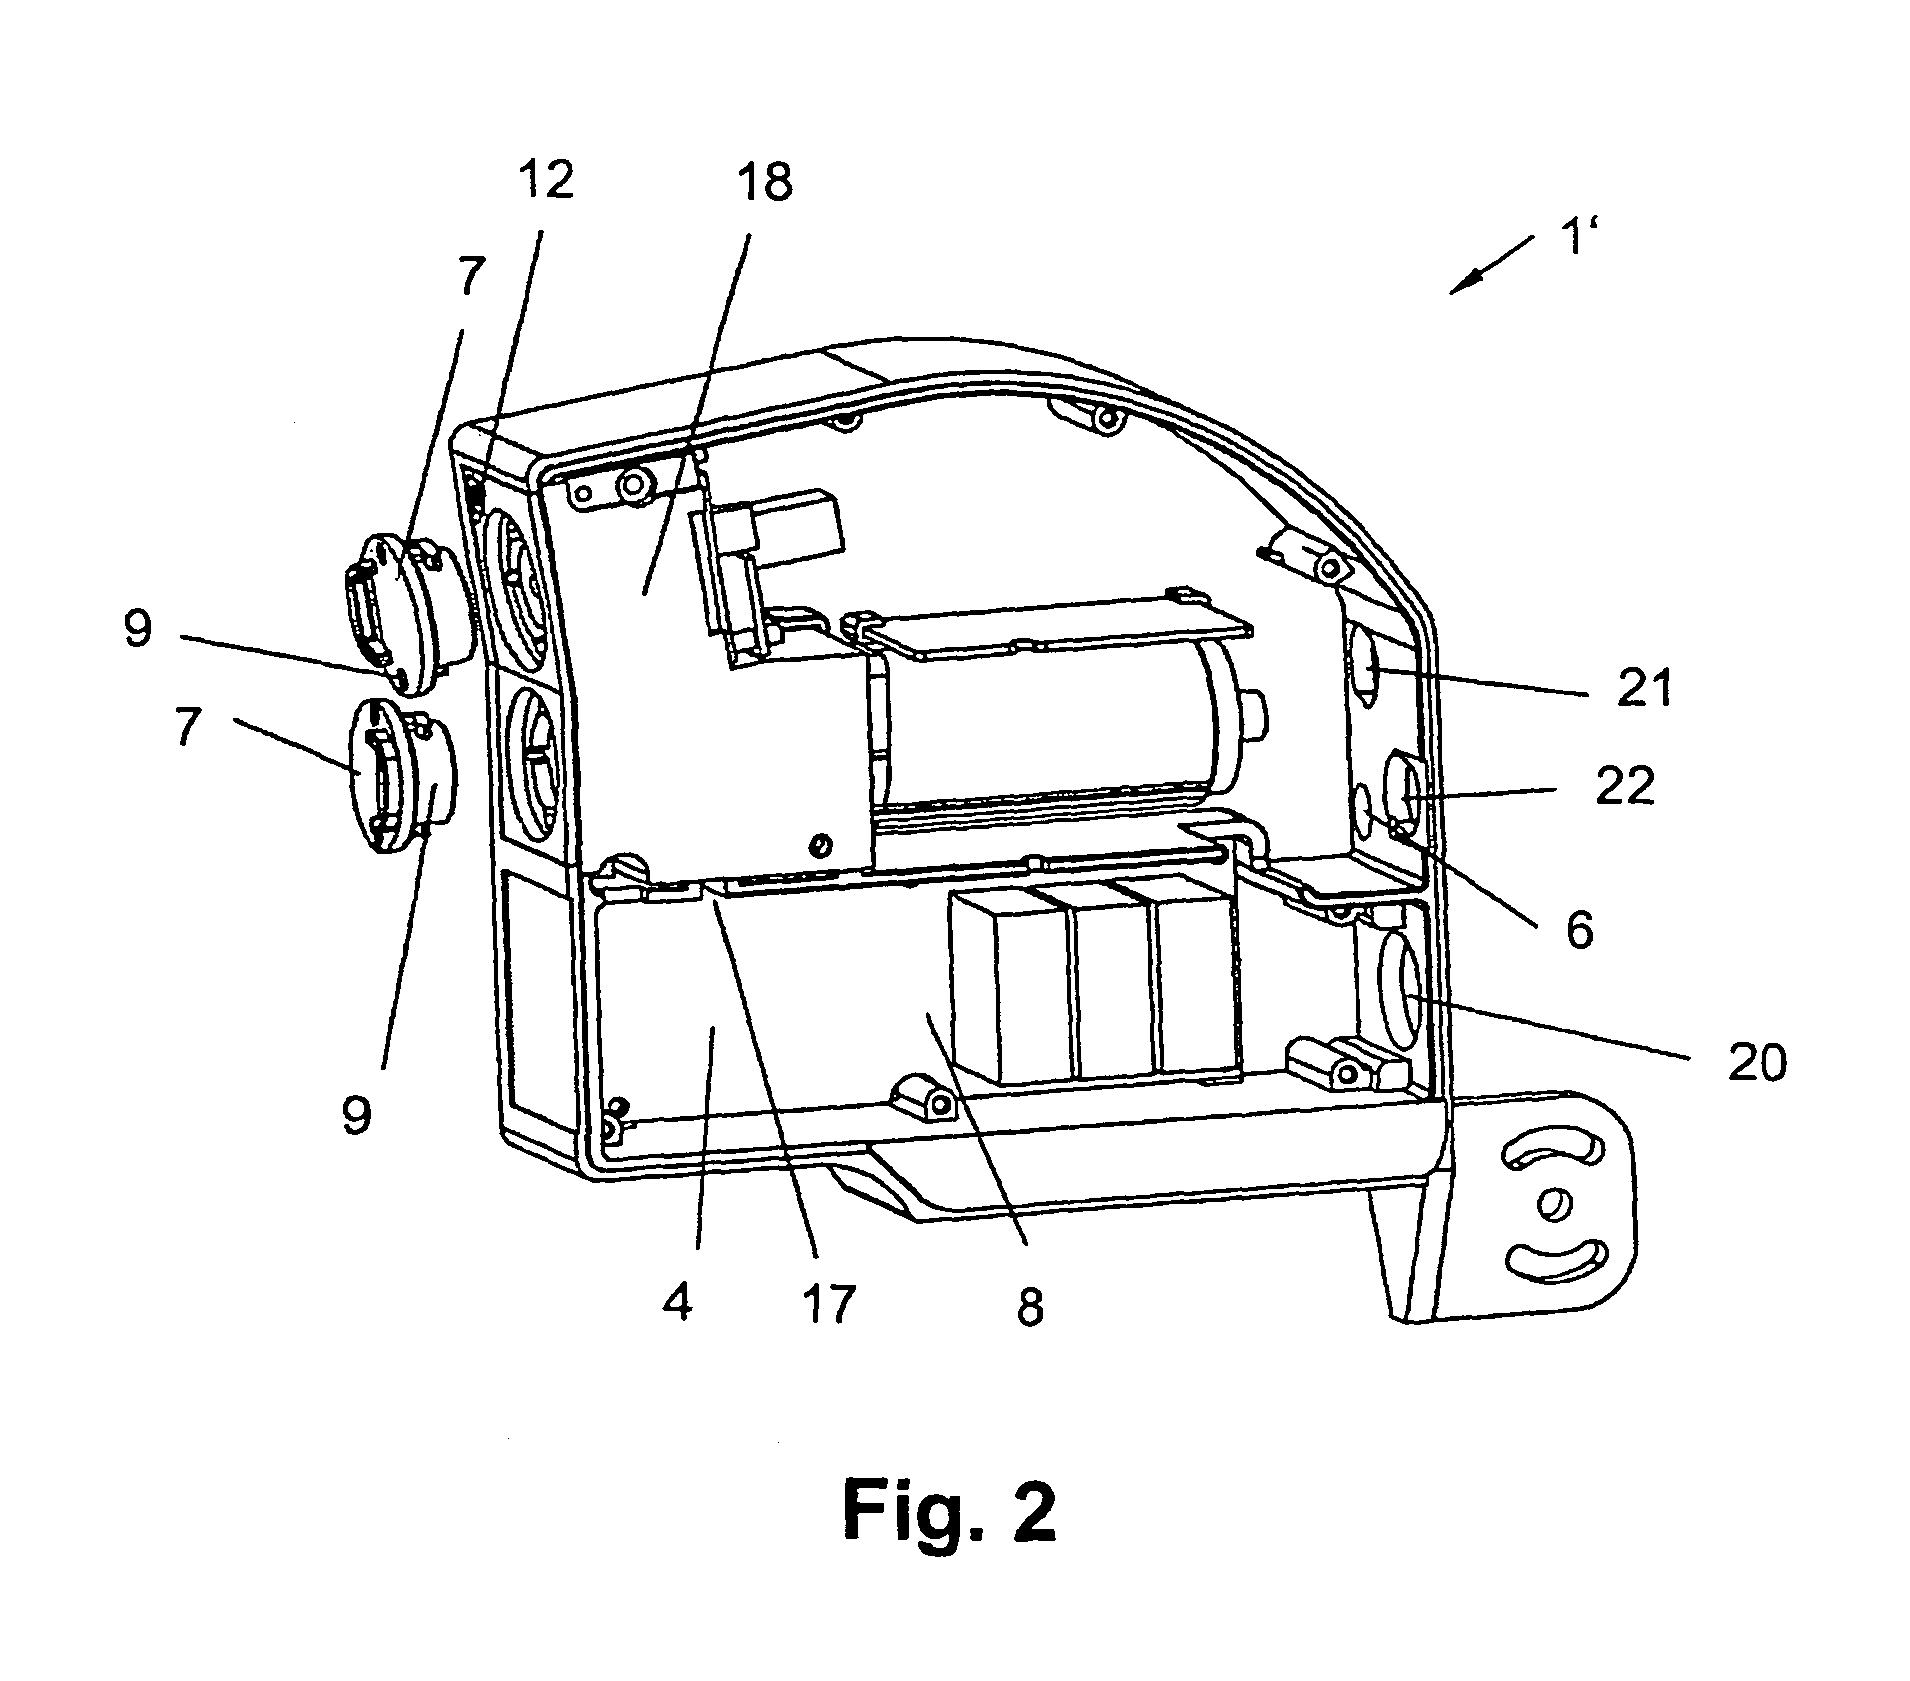 Monitoring module for monitoring a process with an electric arc